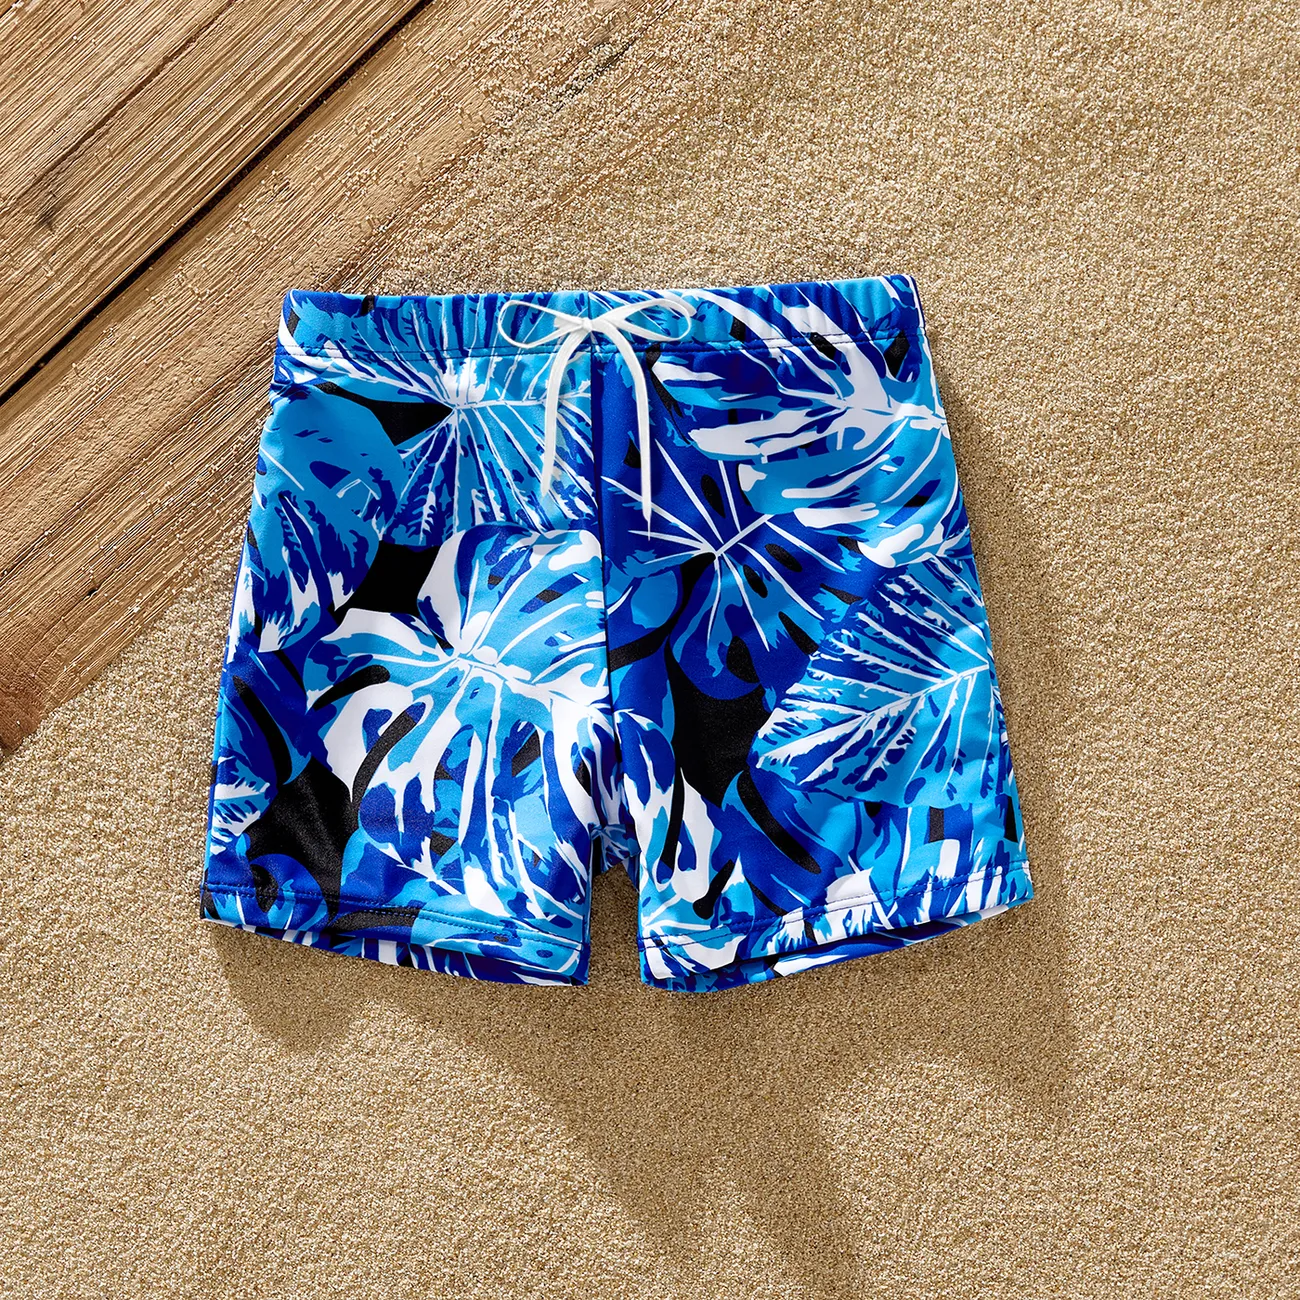 Family Matching Floral Drawstring Swim Trunks or Blue V Neck One-Piece Swimsuit (Quick-Dry) Blue big image 1